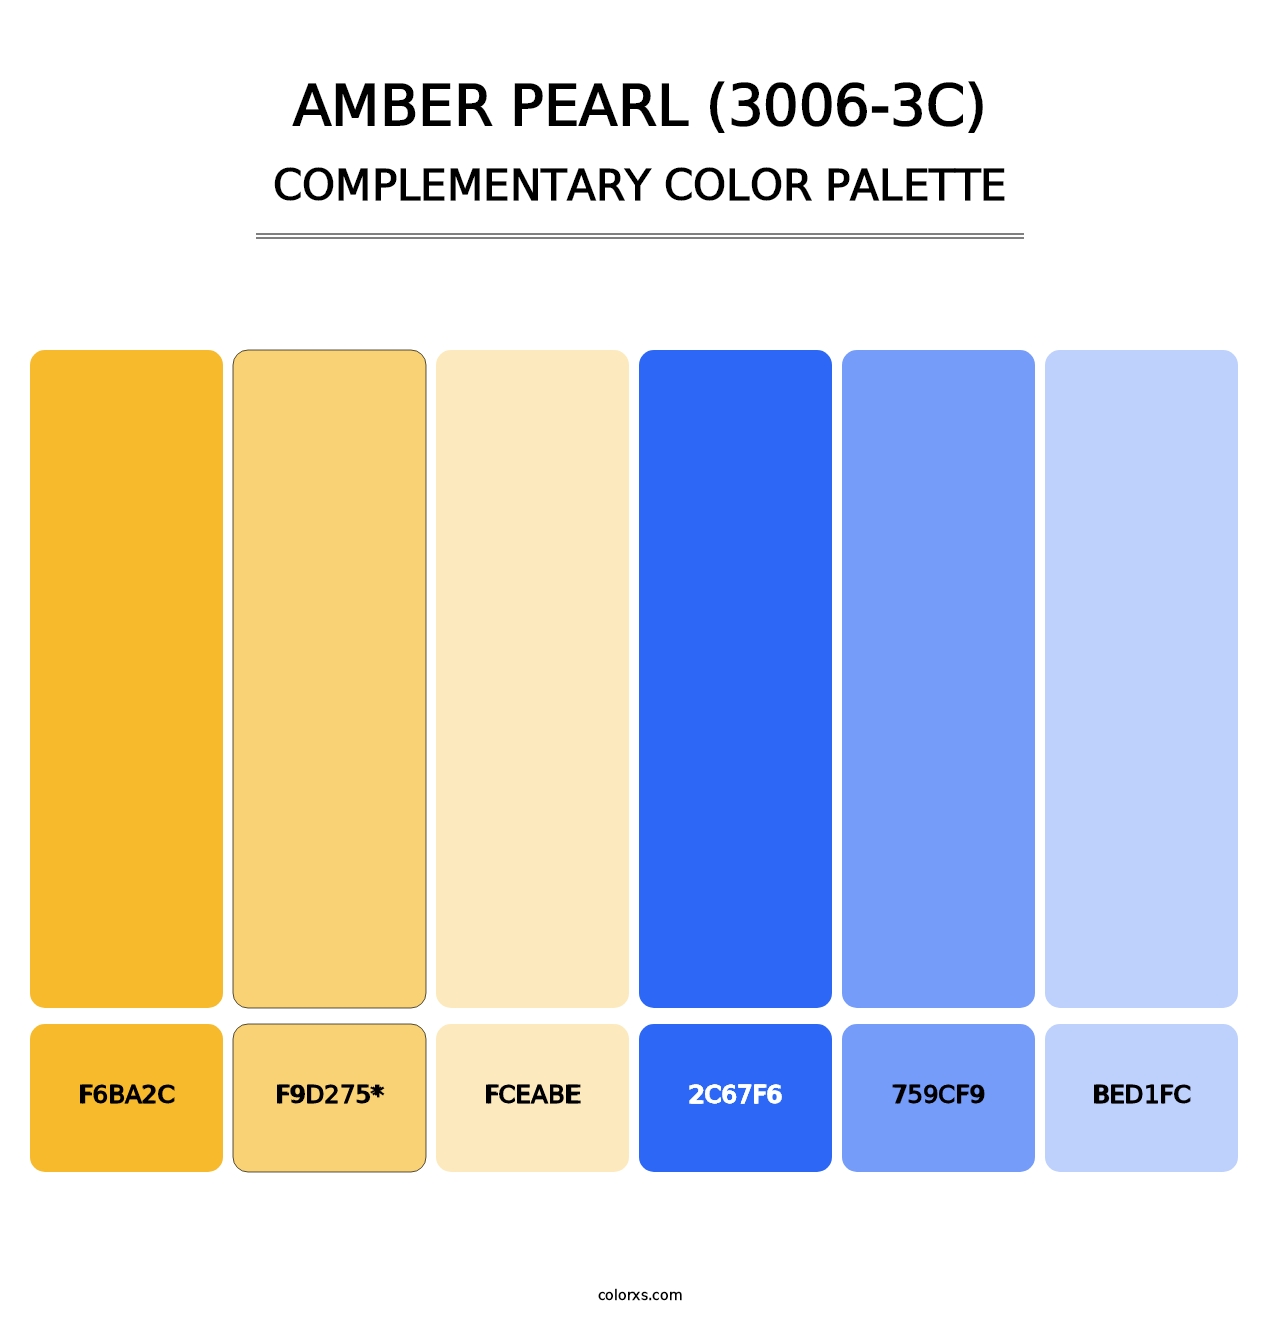 Amber Pearl (3006-3C) - Complementary Color Palette